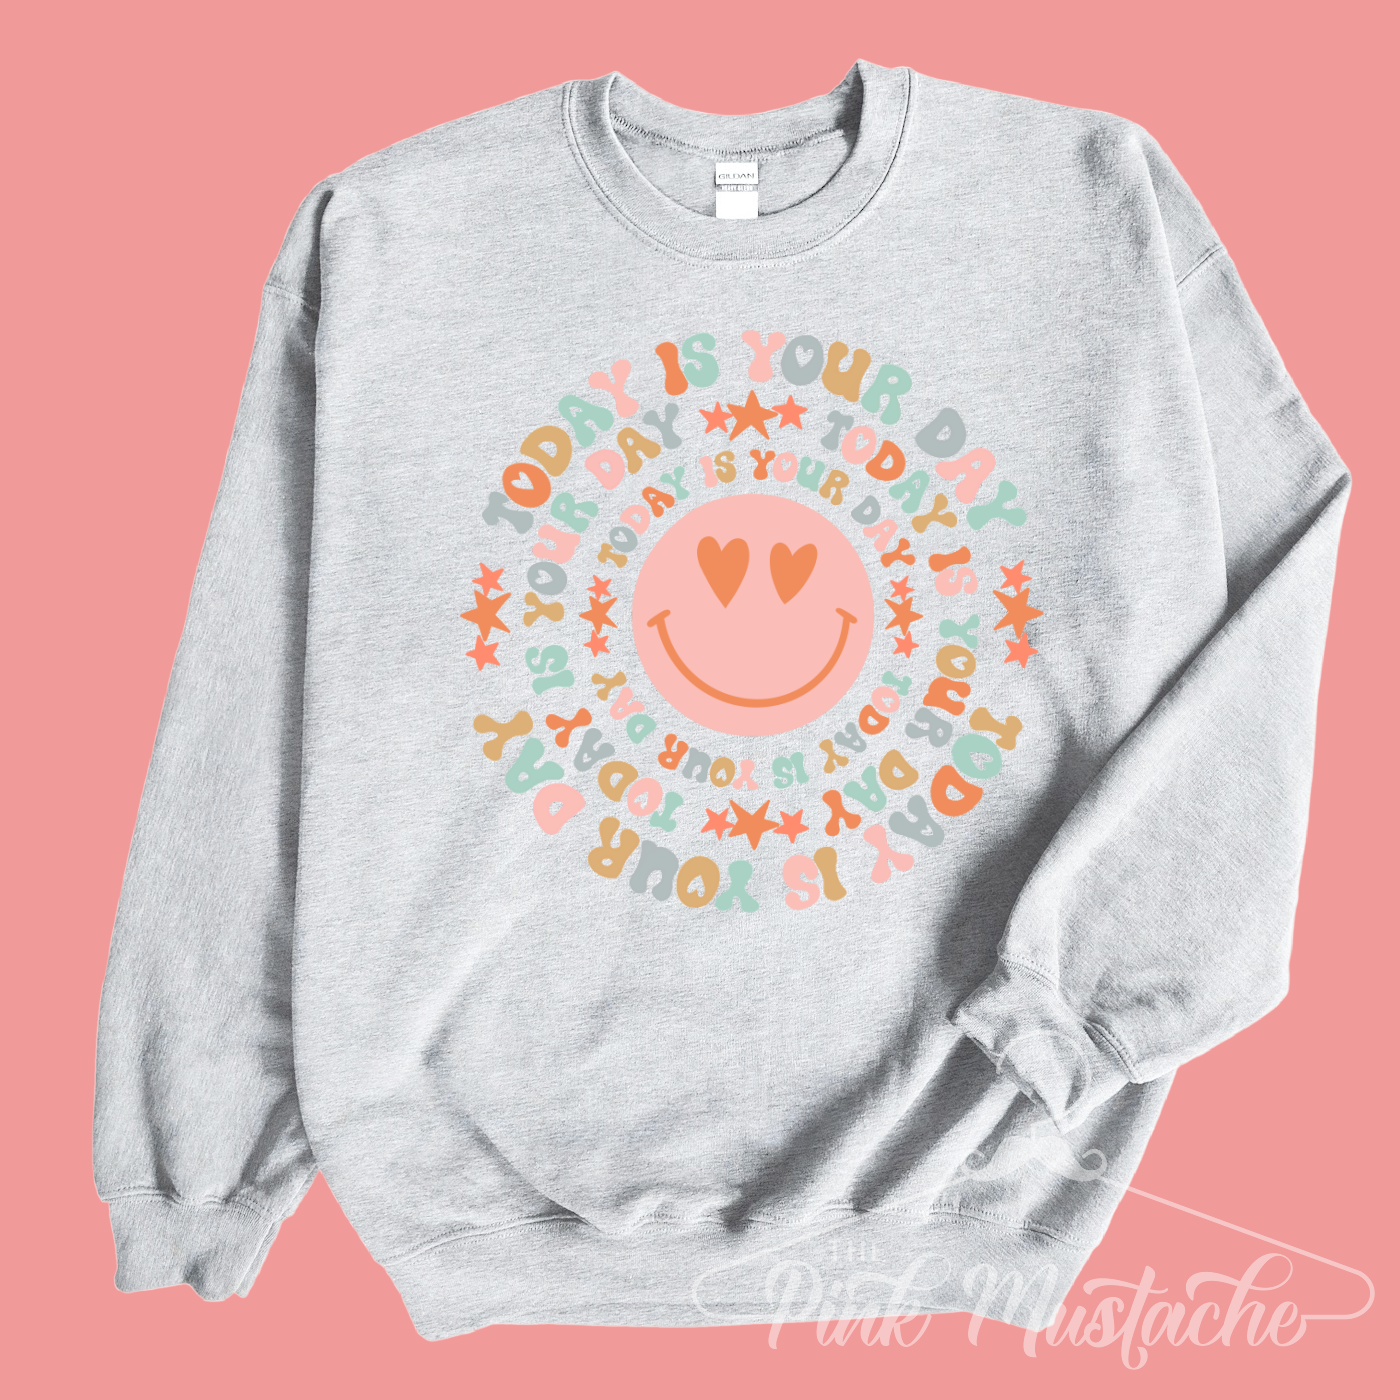 Today Is Your Day Smiley Face Sweatshirt/ Super Cute Unisex Sized Sweatshirt/ Youth and Adult Options